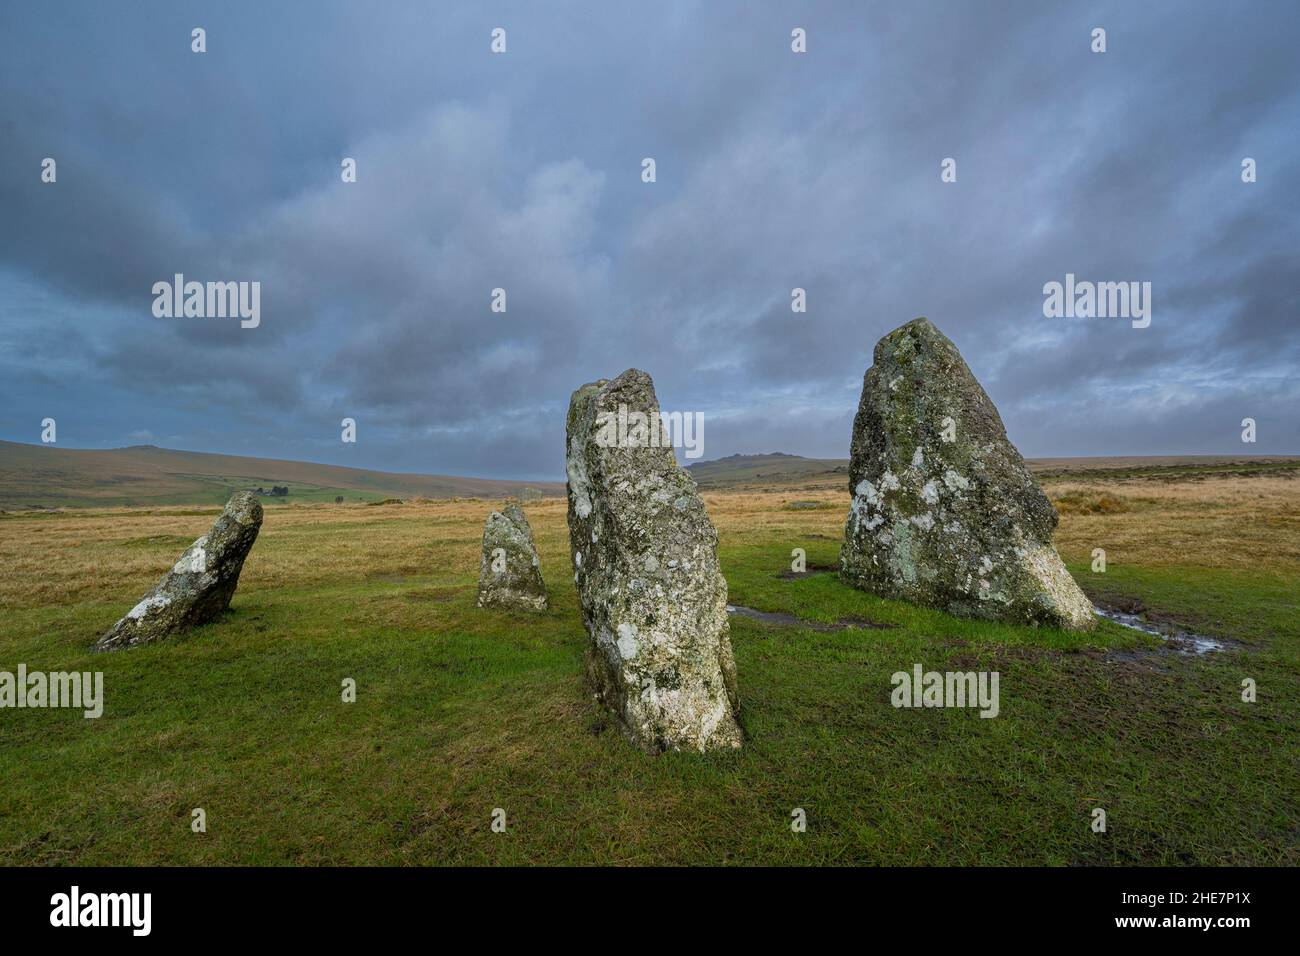 Merrivale, Dartmoor National Park. 9th January 2022. UK Weather: Dartmoor on a cloudy and wet Sunday afternoon. A view of a section of standing stones which form part of the megalithic stone rows at Merrivale with the rugged backdrop of Great Mis Tor seen in the distance. Credit: Celia McMahon/Alamy Live News Stock Photo